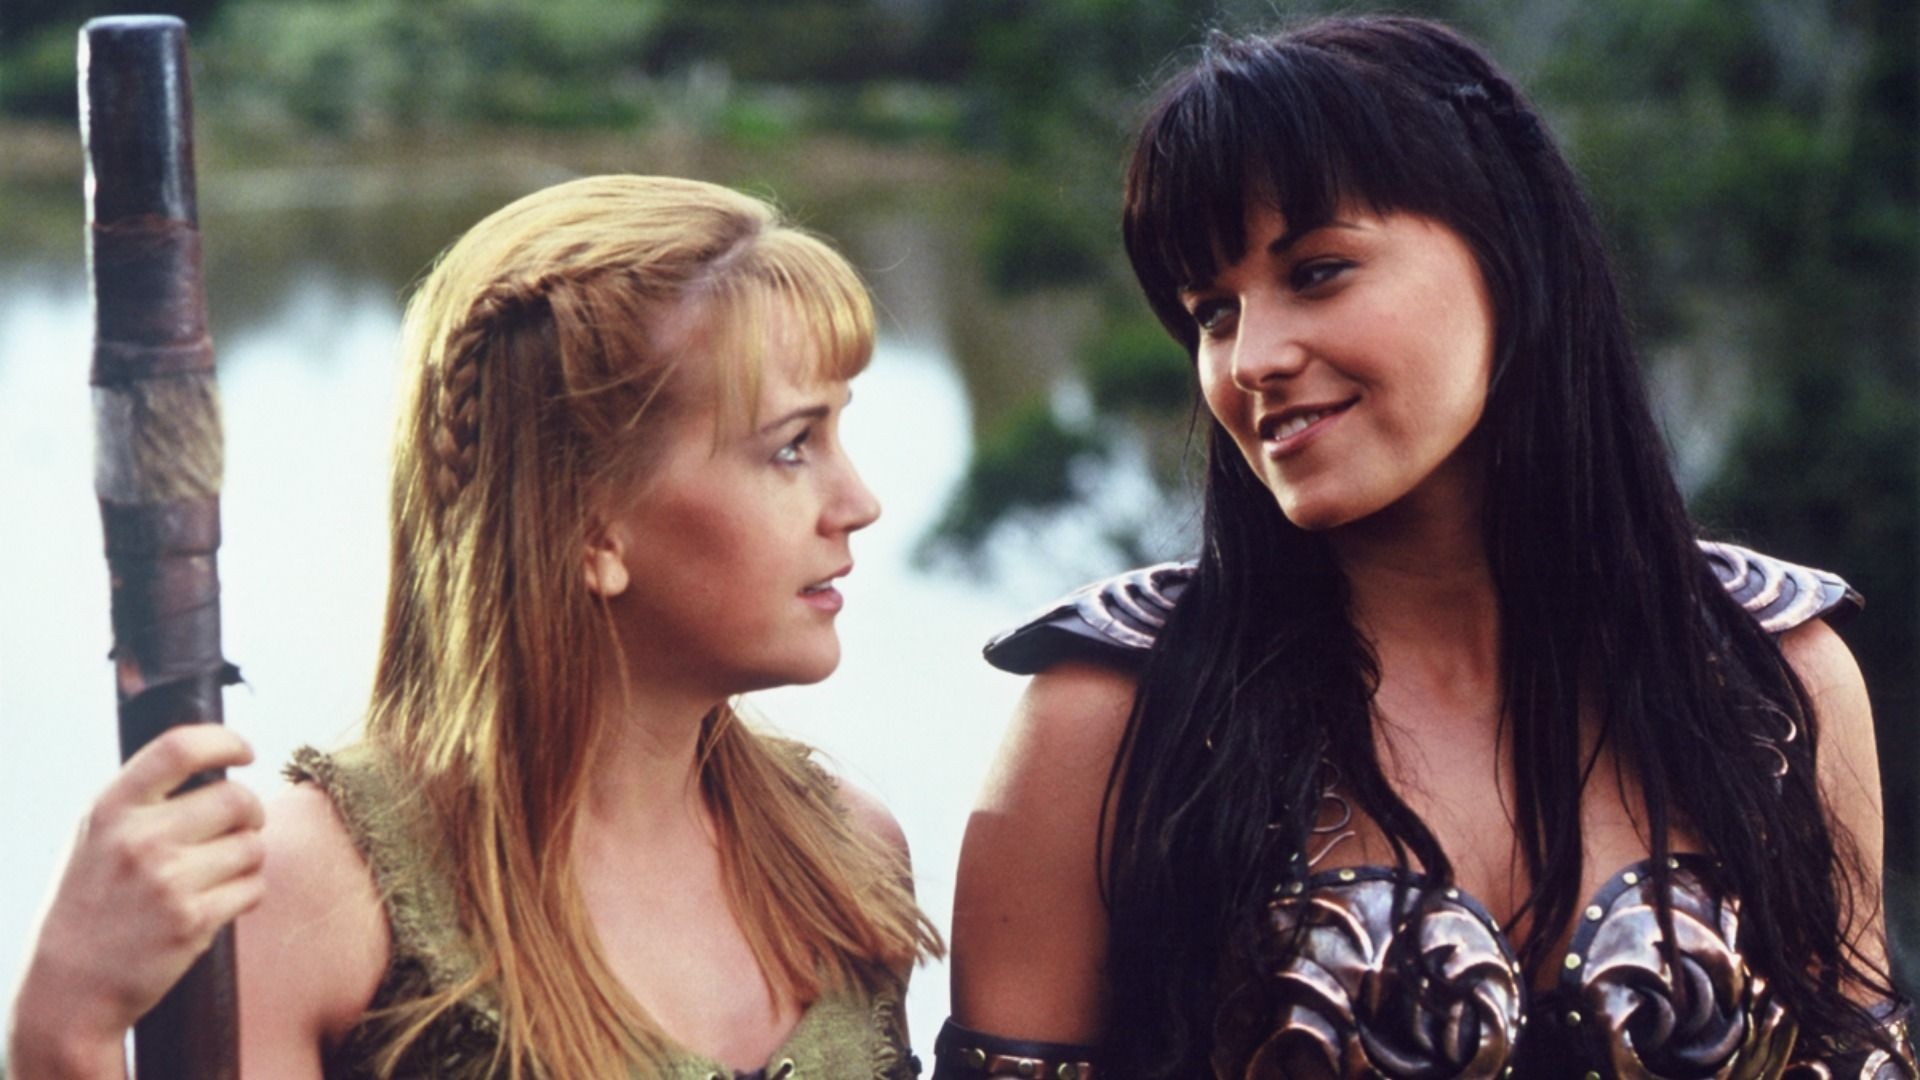 Lucy Lawless: Xena, Gabrielle, A mighty Warrior Princess with a dark past, Writer-director-producer Robert Tapert. 1920x1080 Full HD Wallpaper.